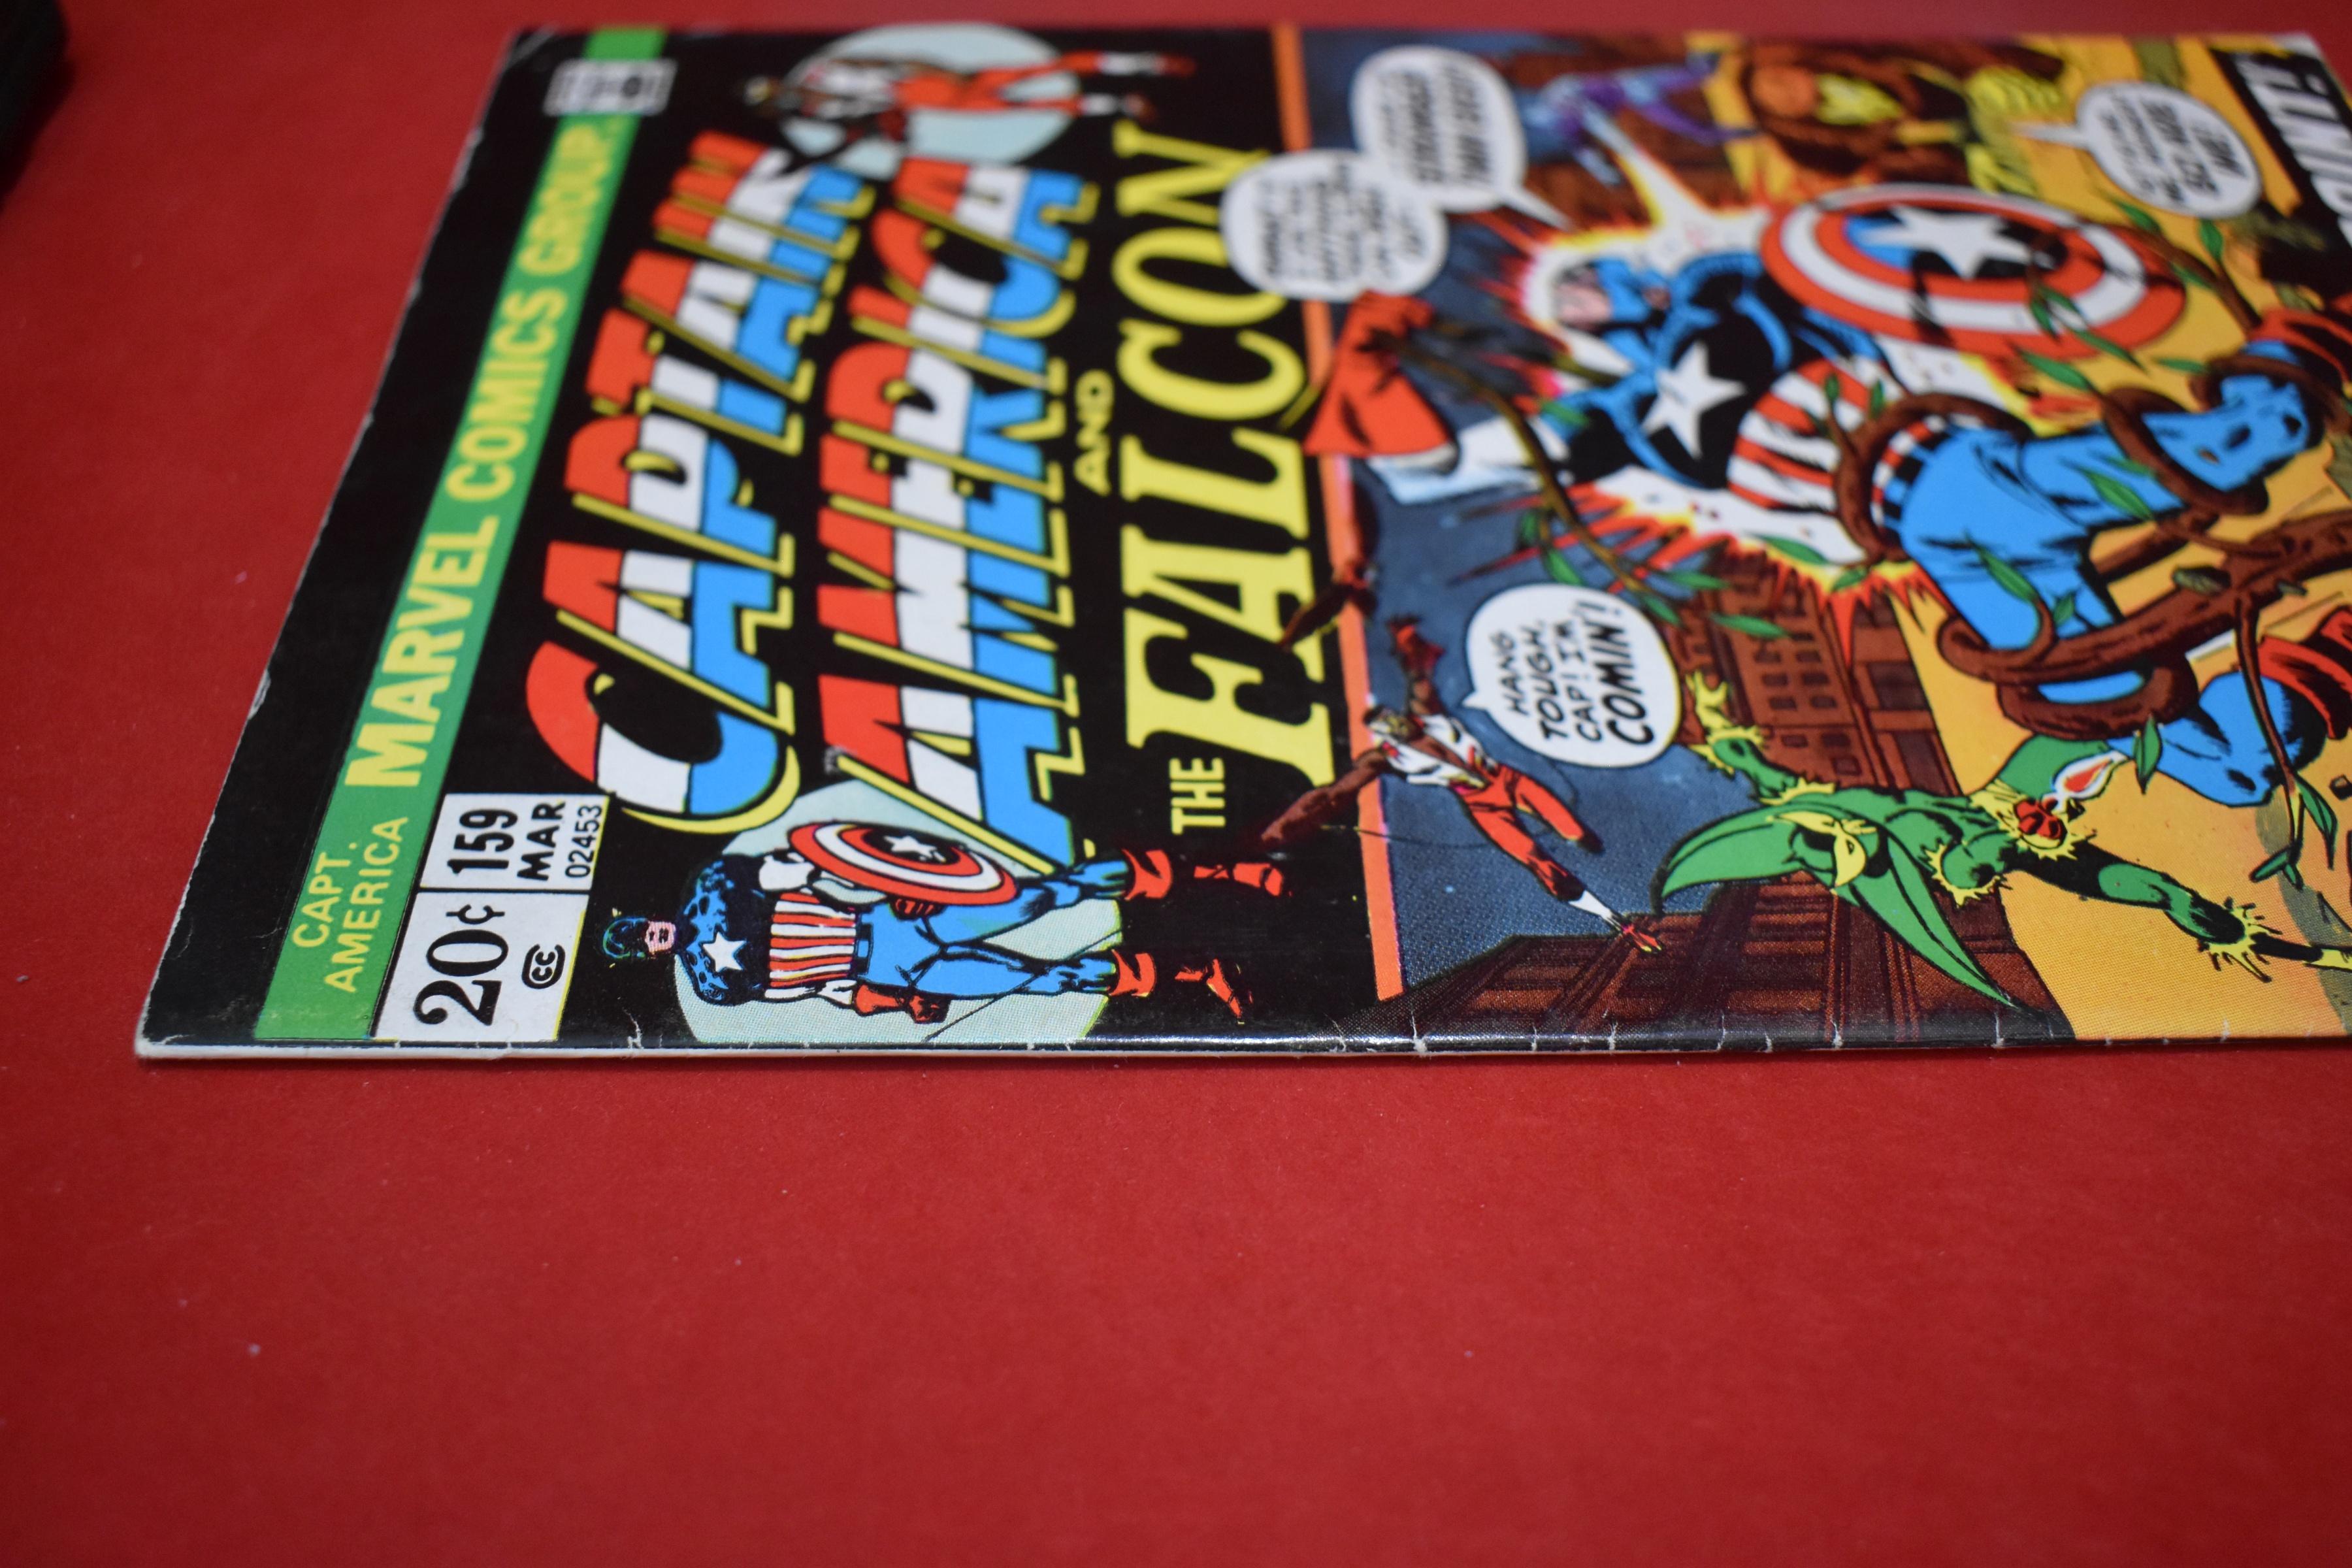 CAPTAIN AMERICA #159 | CRIME WAVE - TURNING POINT | SAL BUSCEMA - 1973